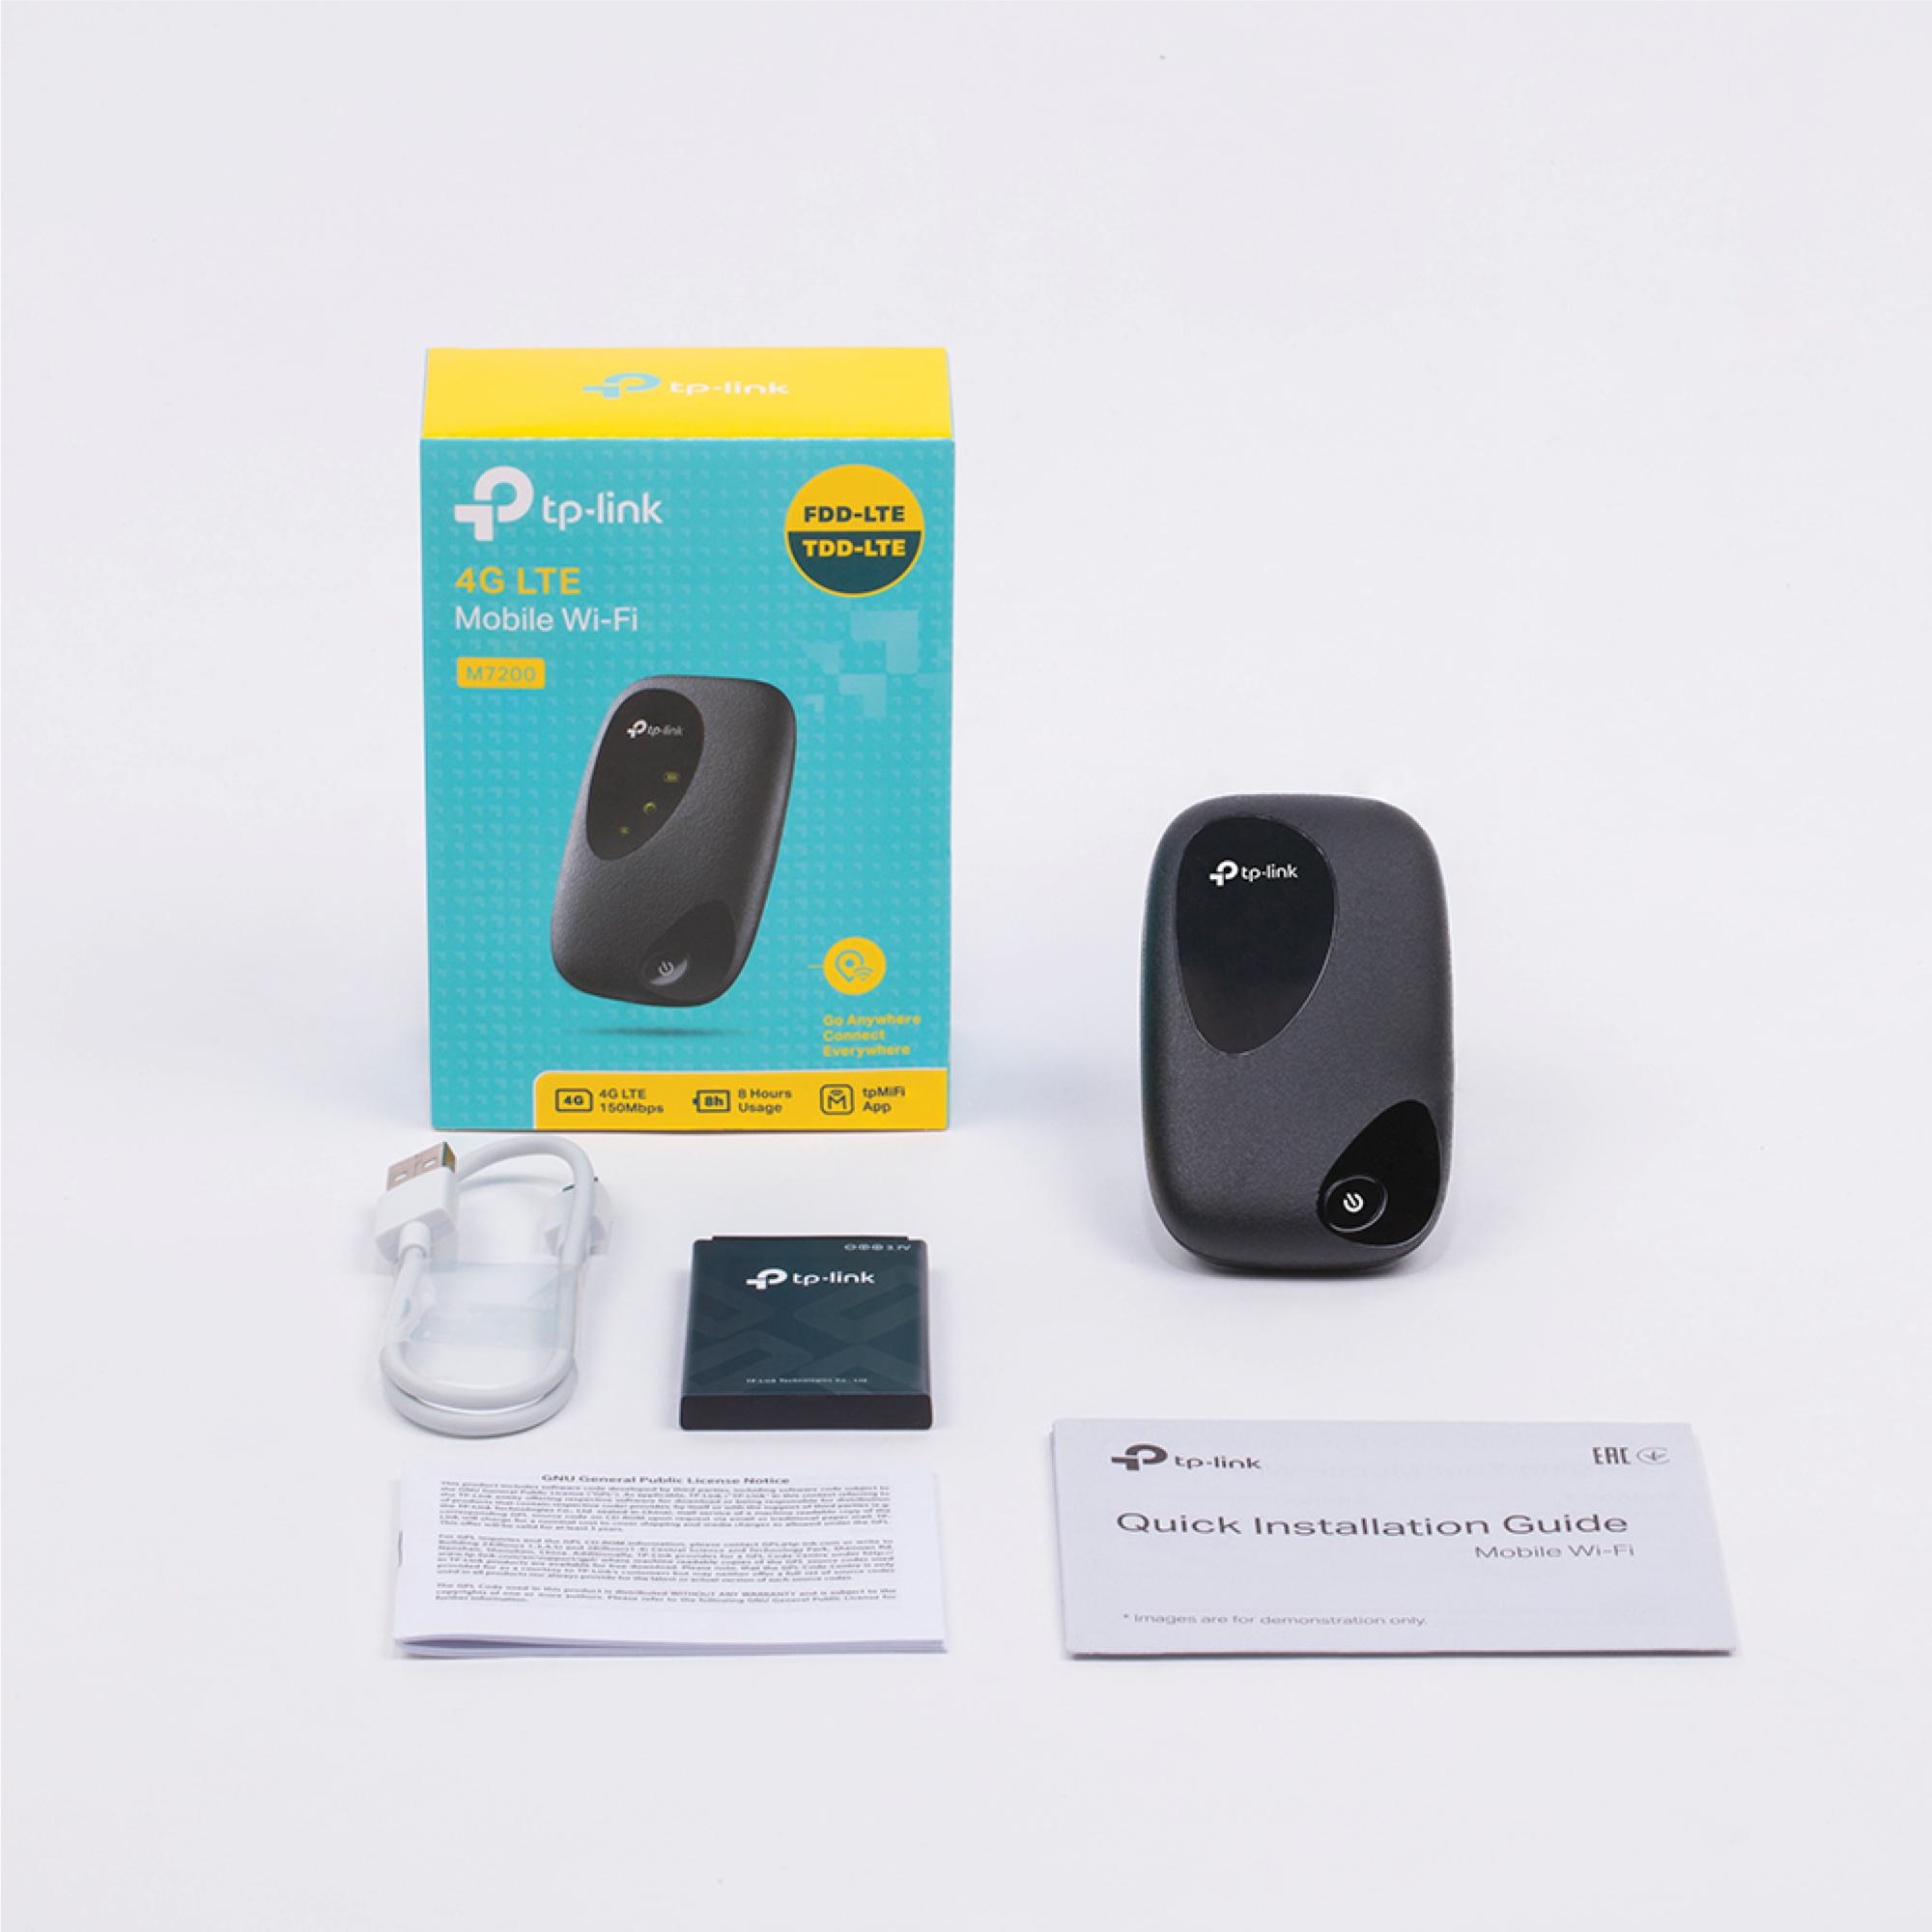 tp-link 4G LTE Mobile Wi-Fi